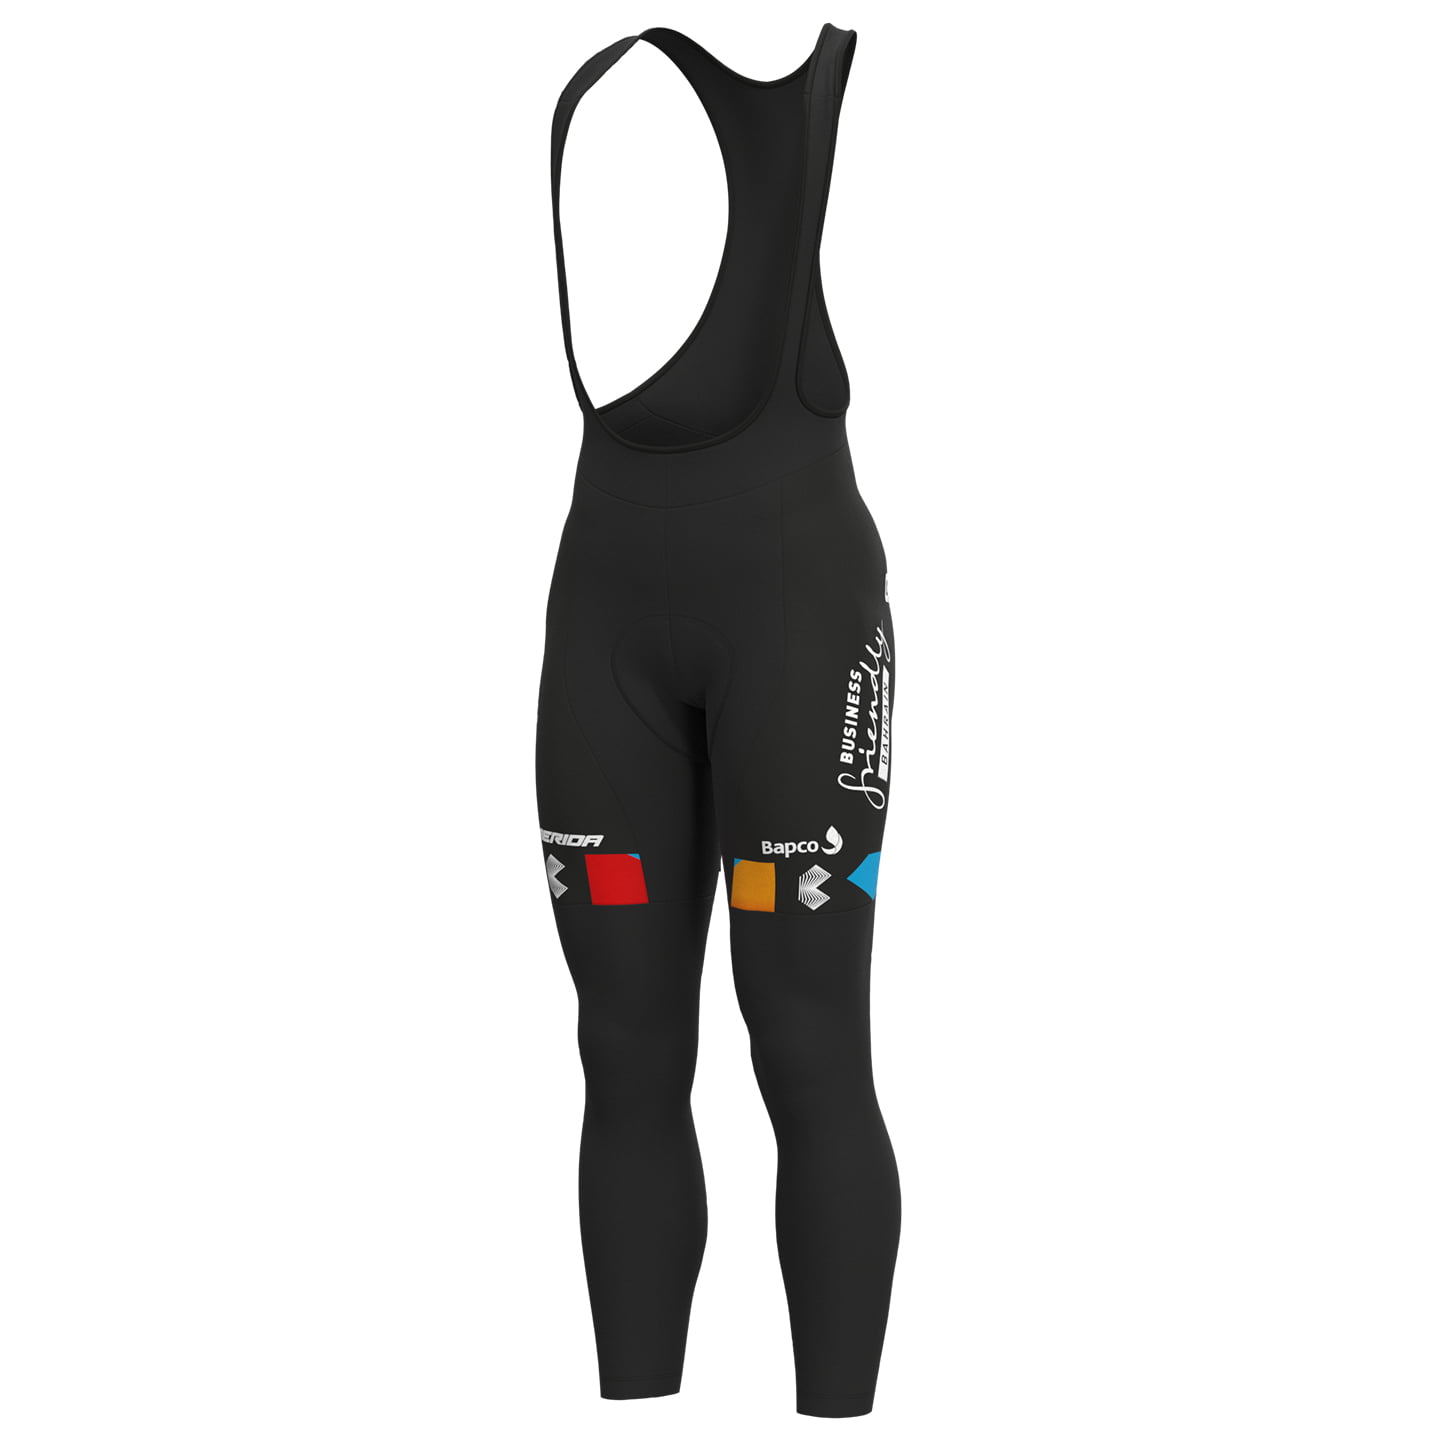 BAHRAIN - VICTORIOUS 2022 Bib Tights, for men, size 2XL, Cycle trousers, Cycle gear